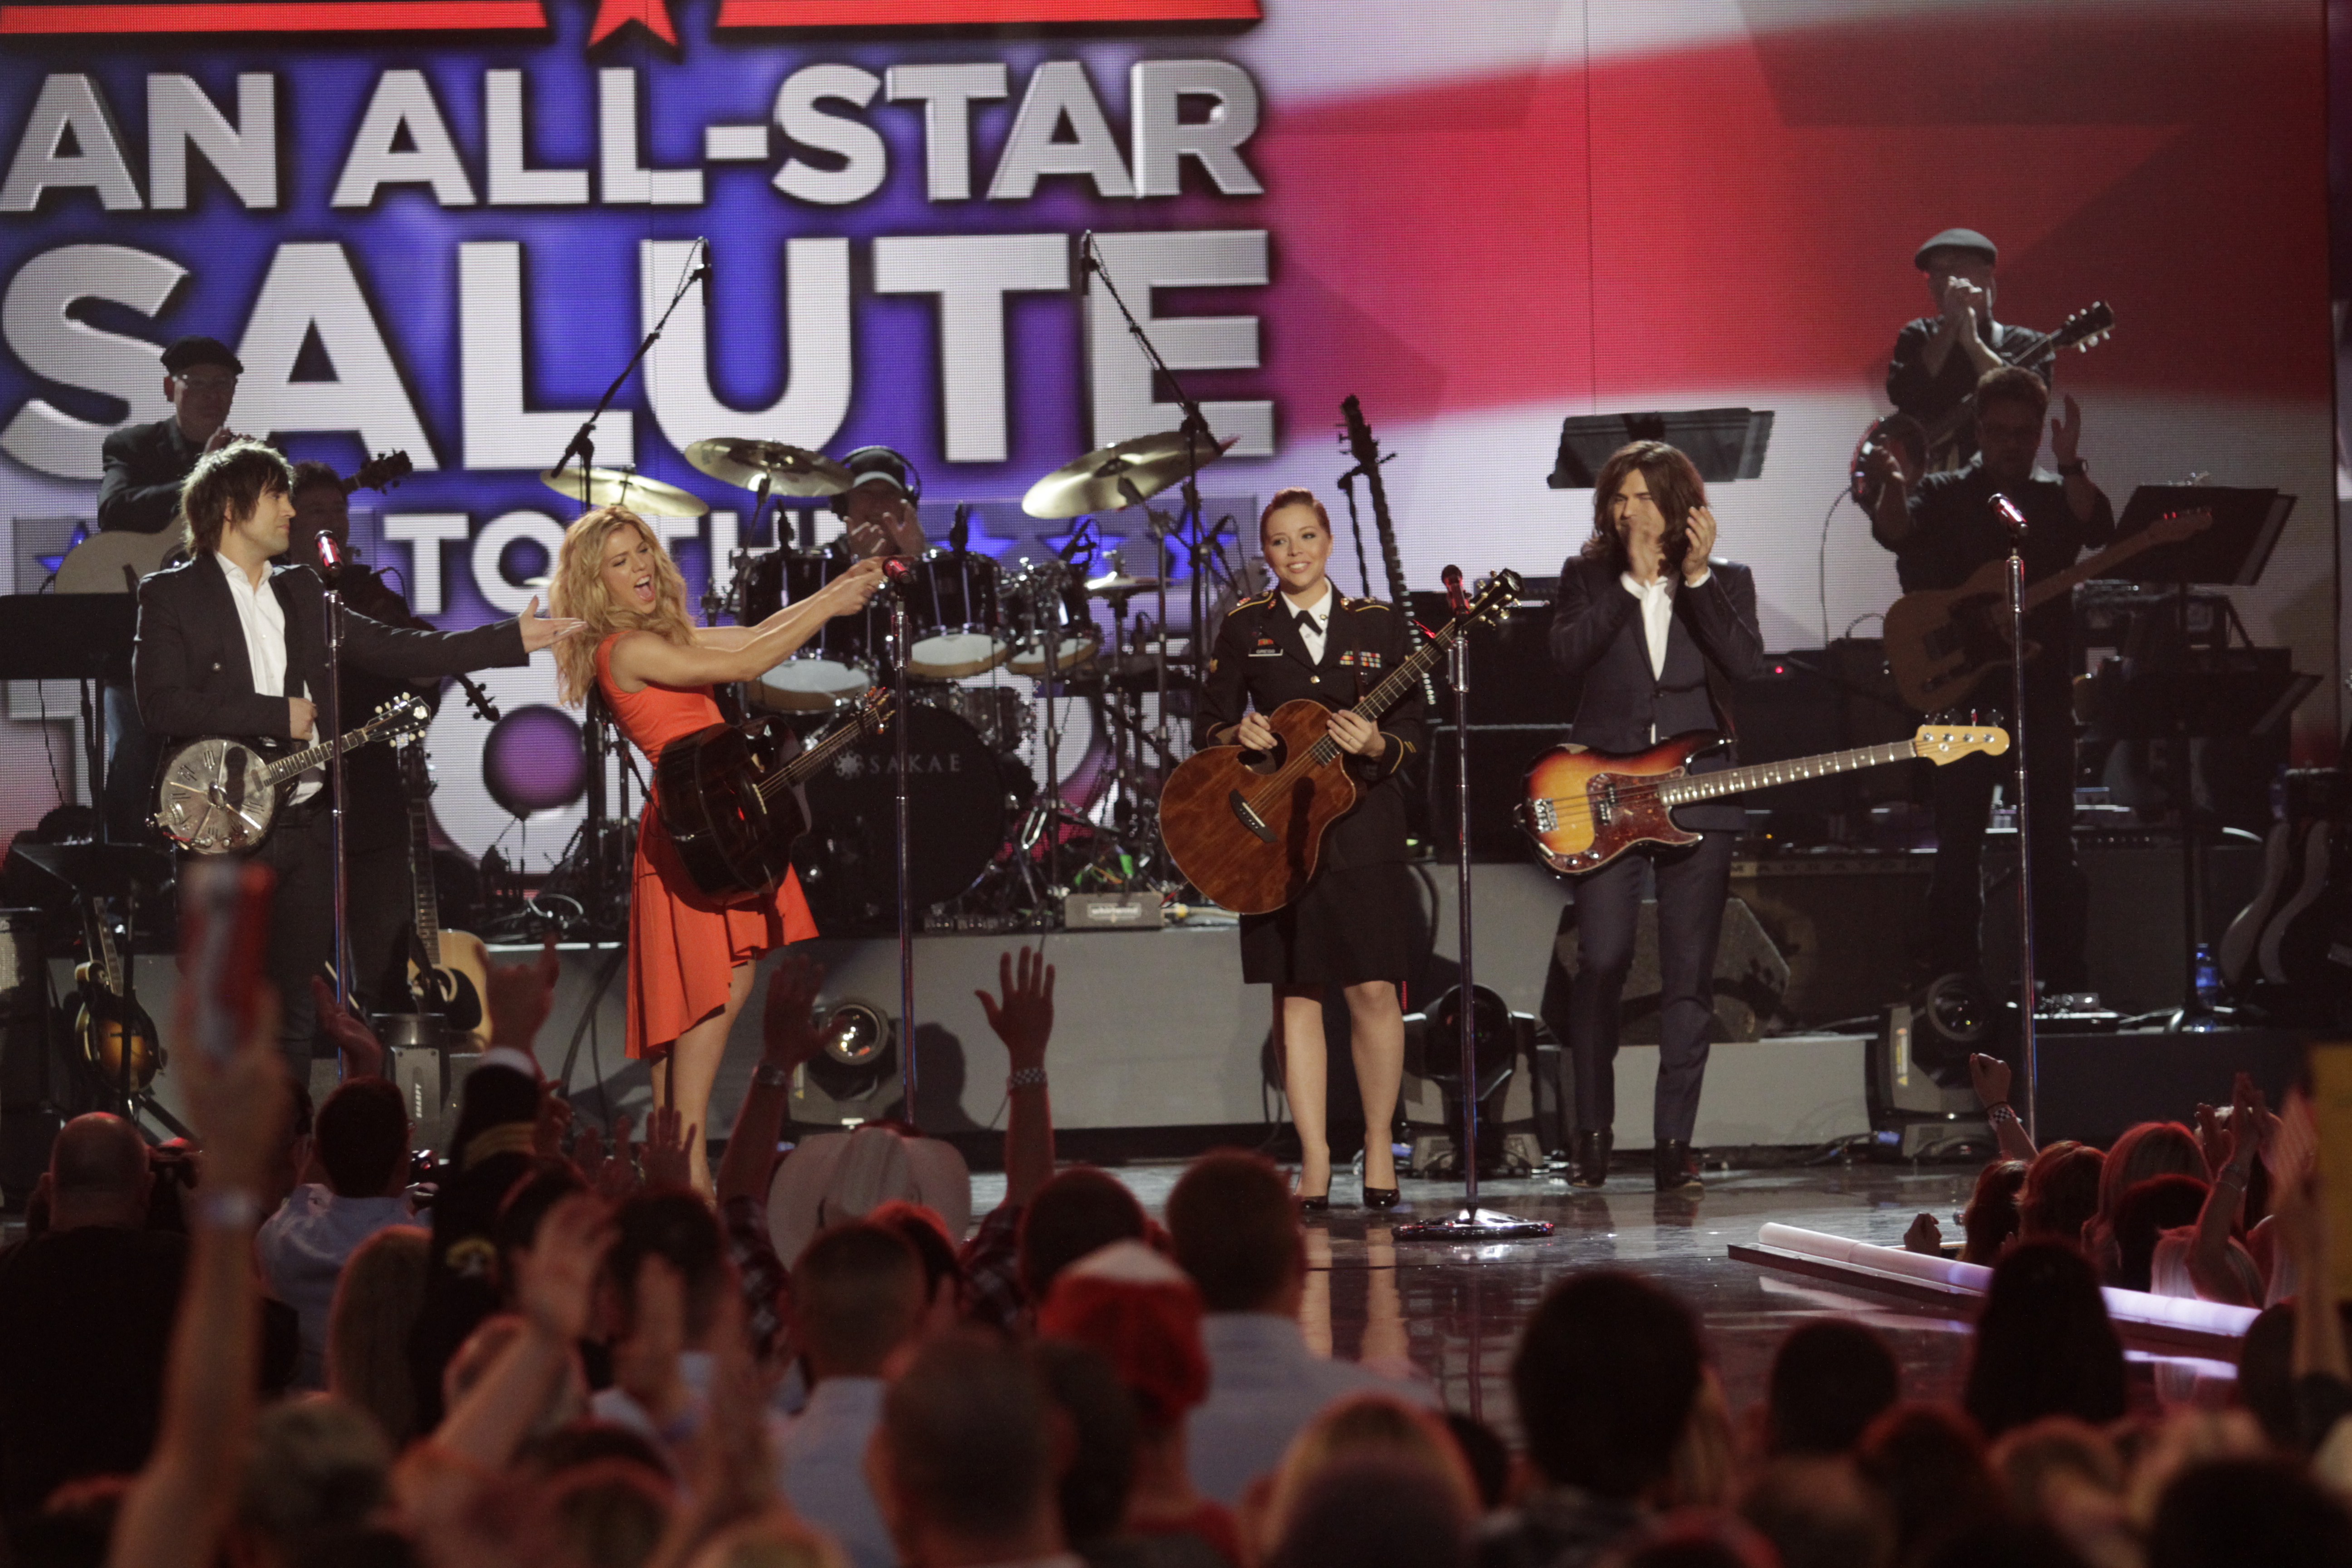 ACM Presents: An All-Star Salute To The Troops